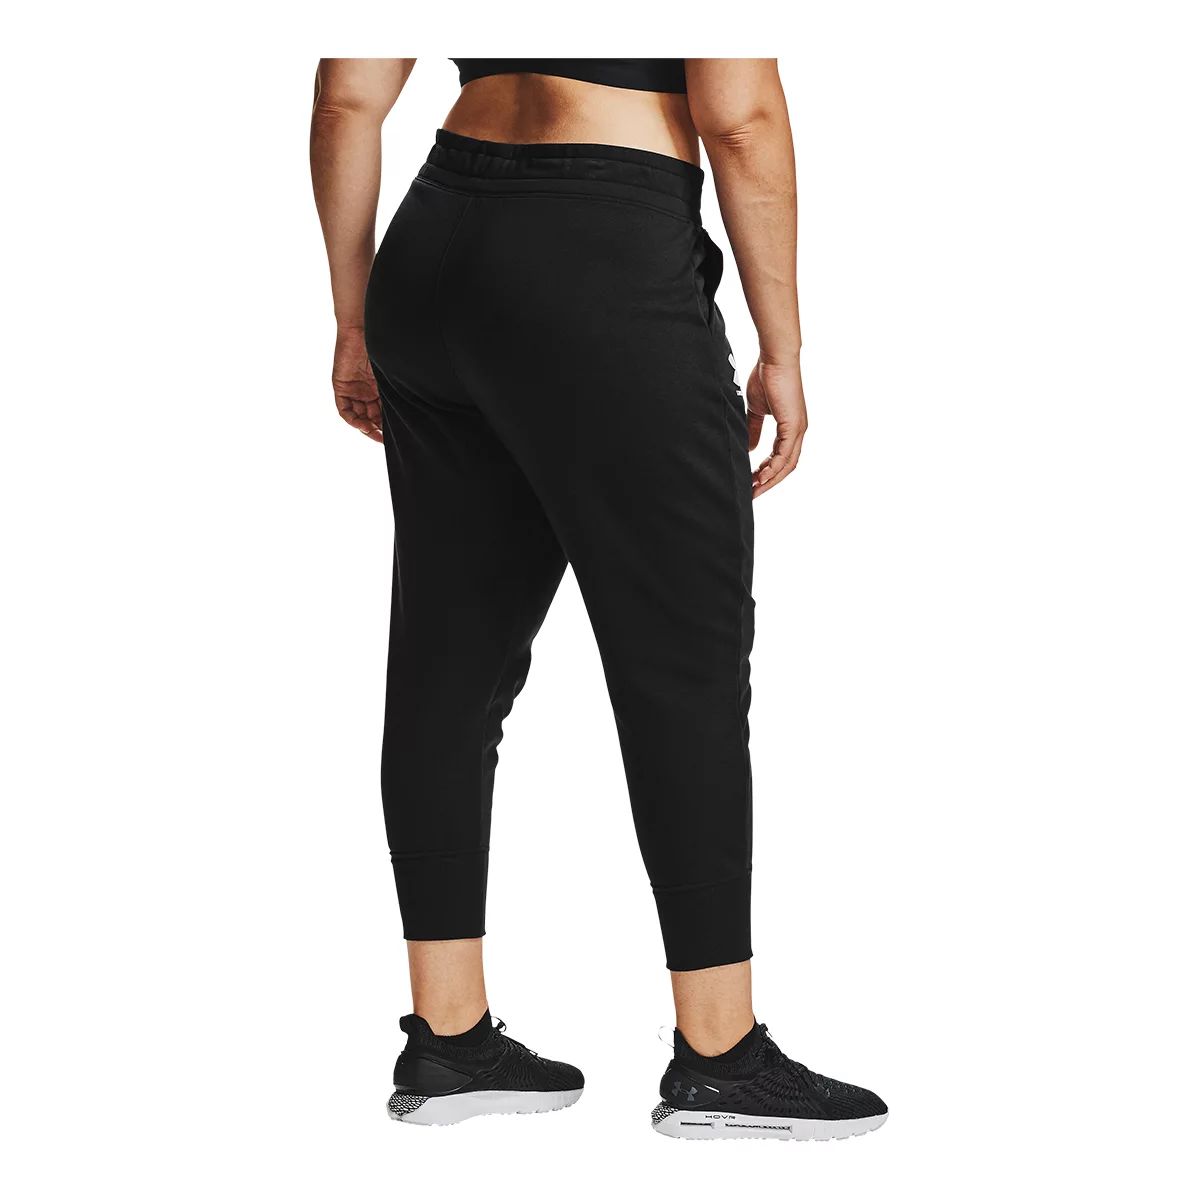 New With Tags Womens Ladies UA Under Armour Sweatpants Athletic